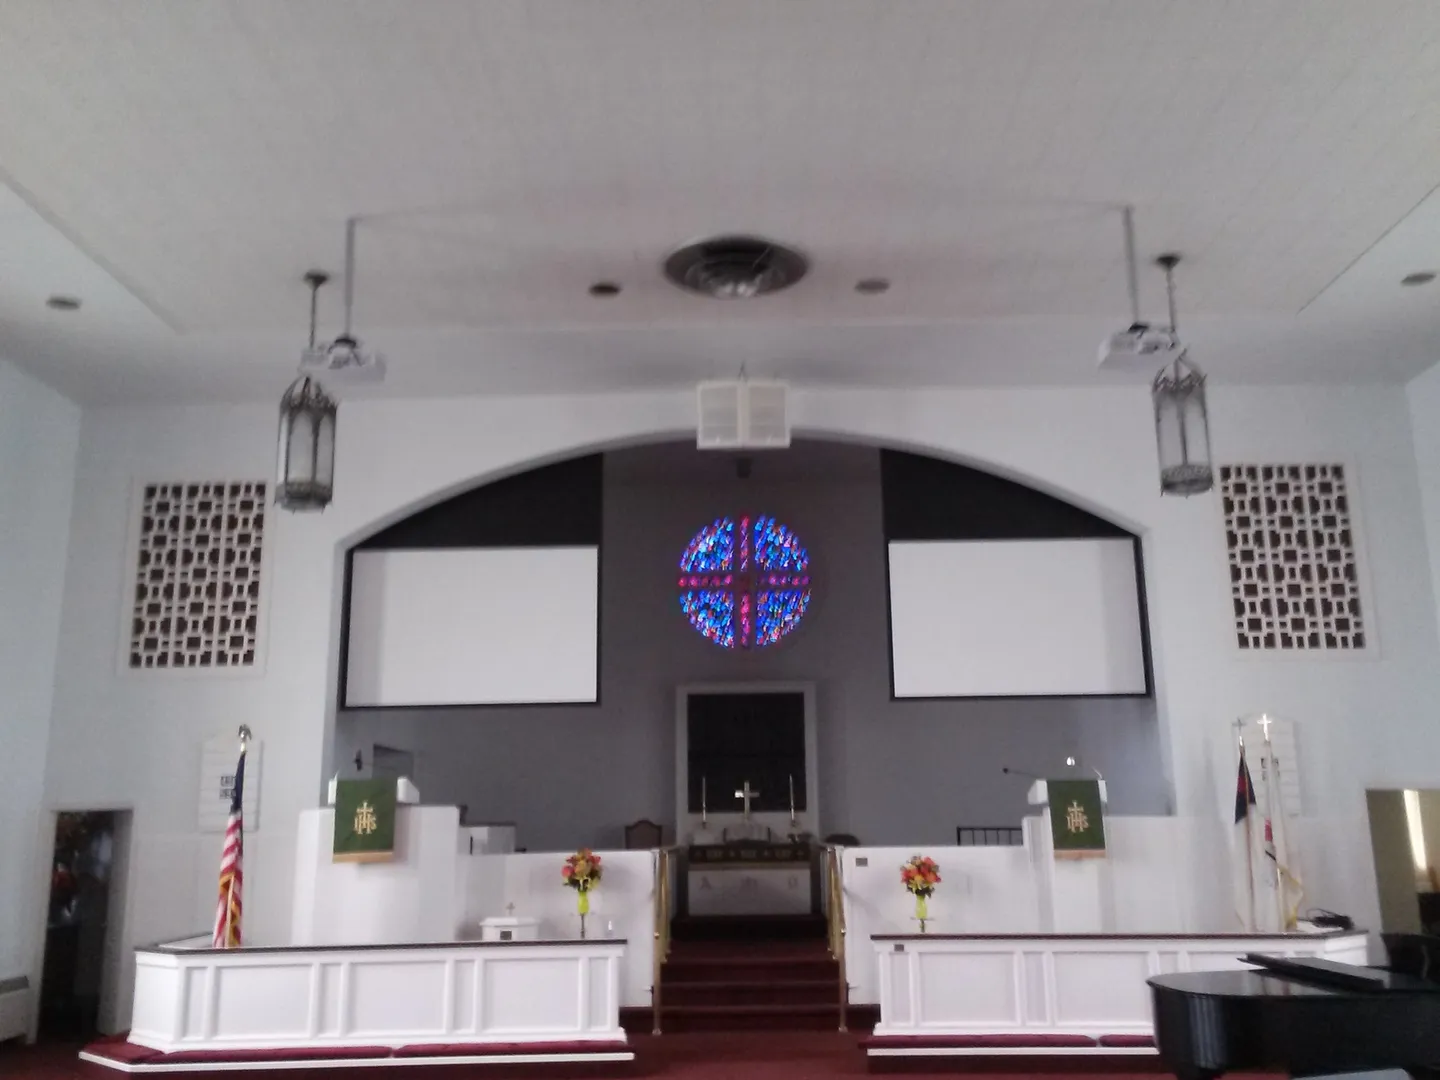 A church with two large screens and a cross on the wall.